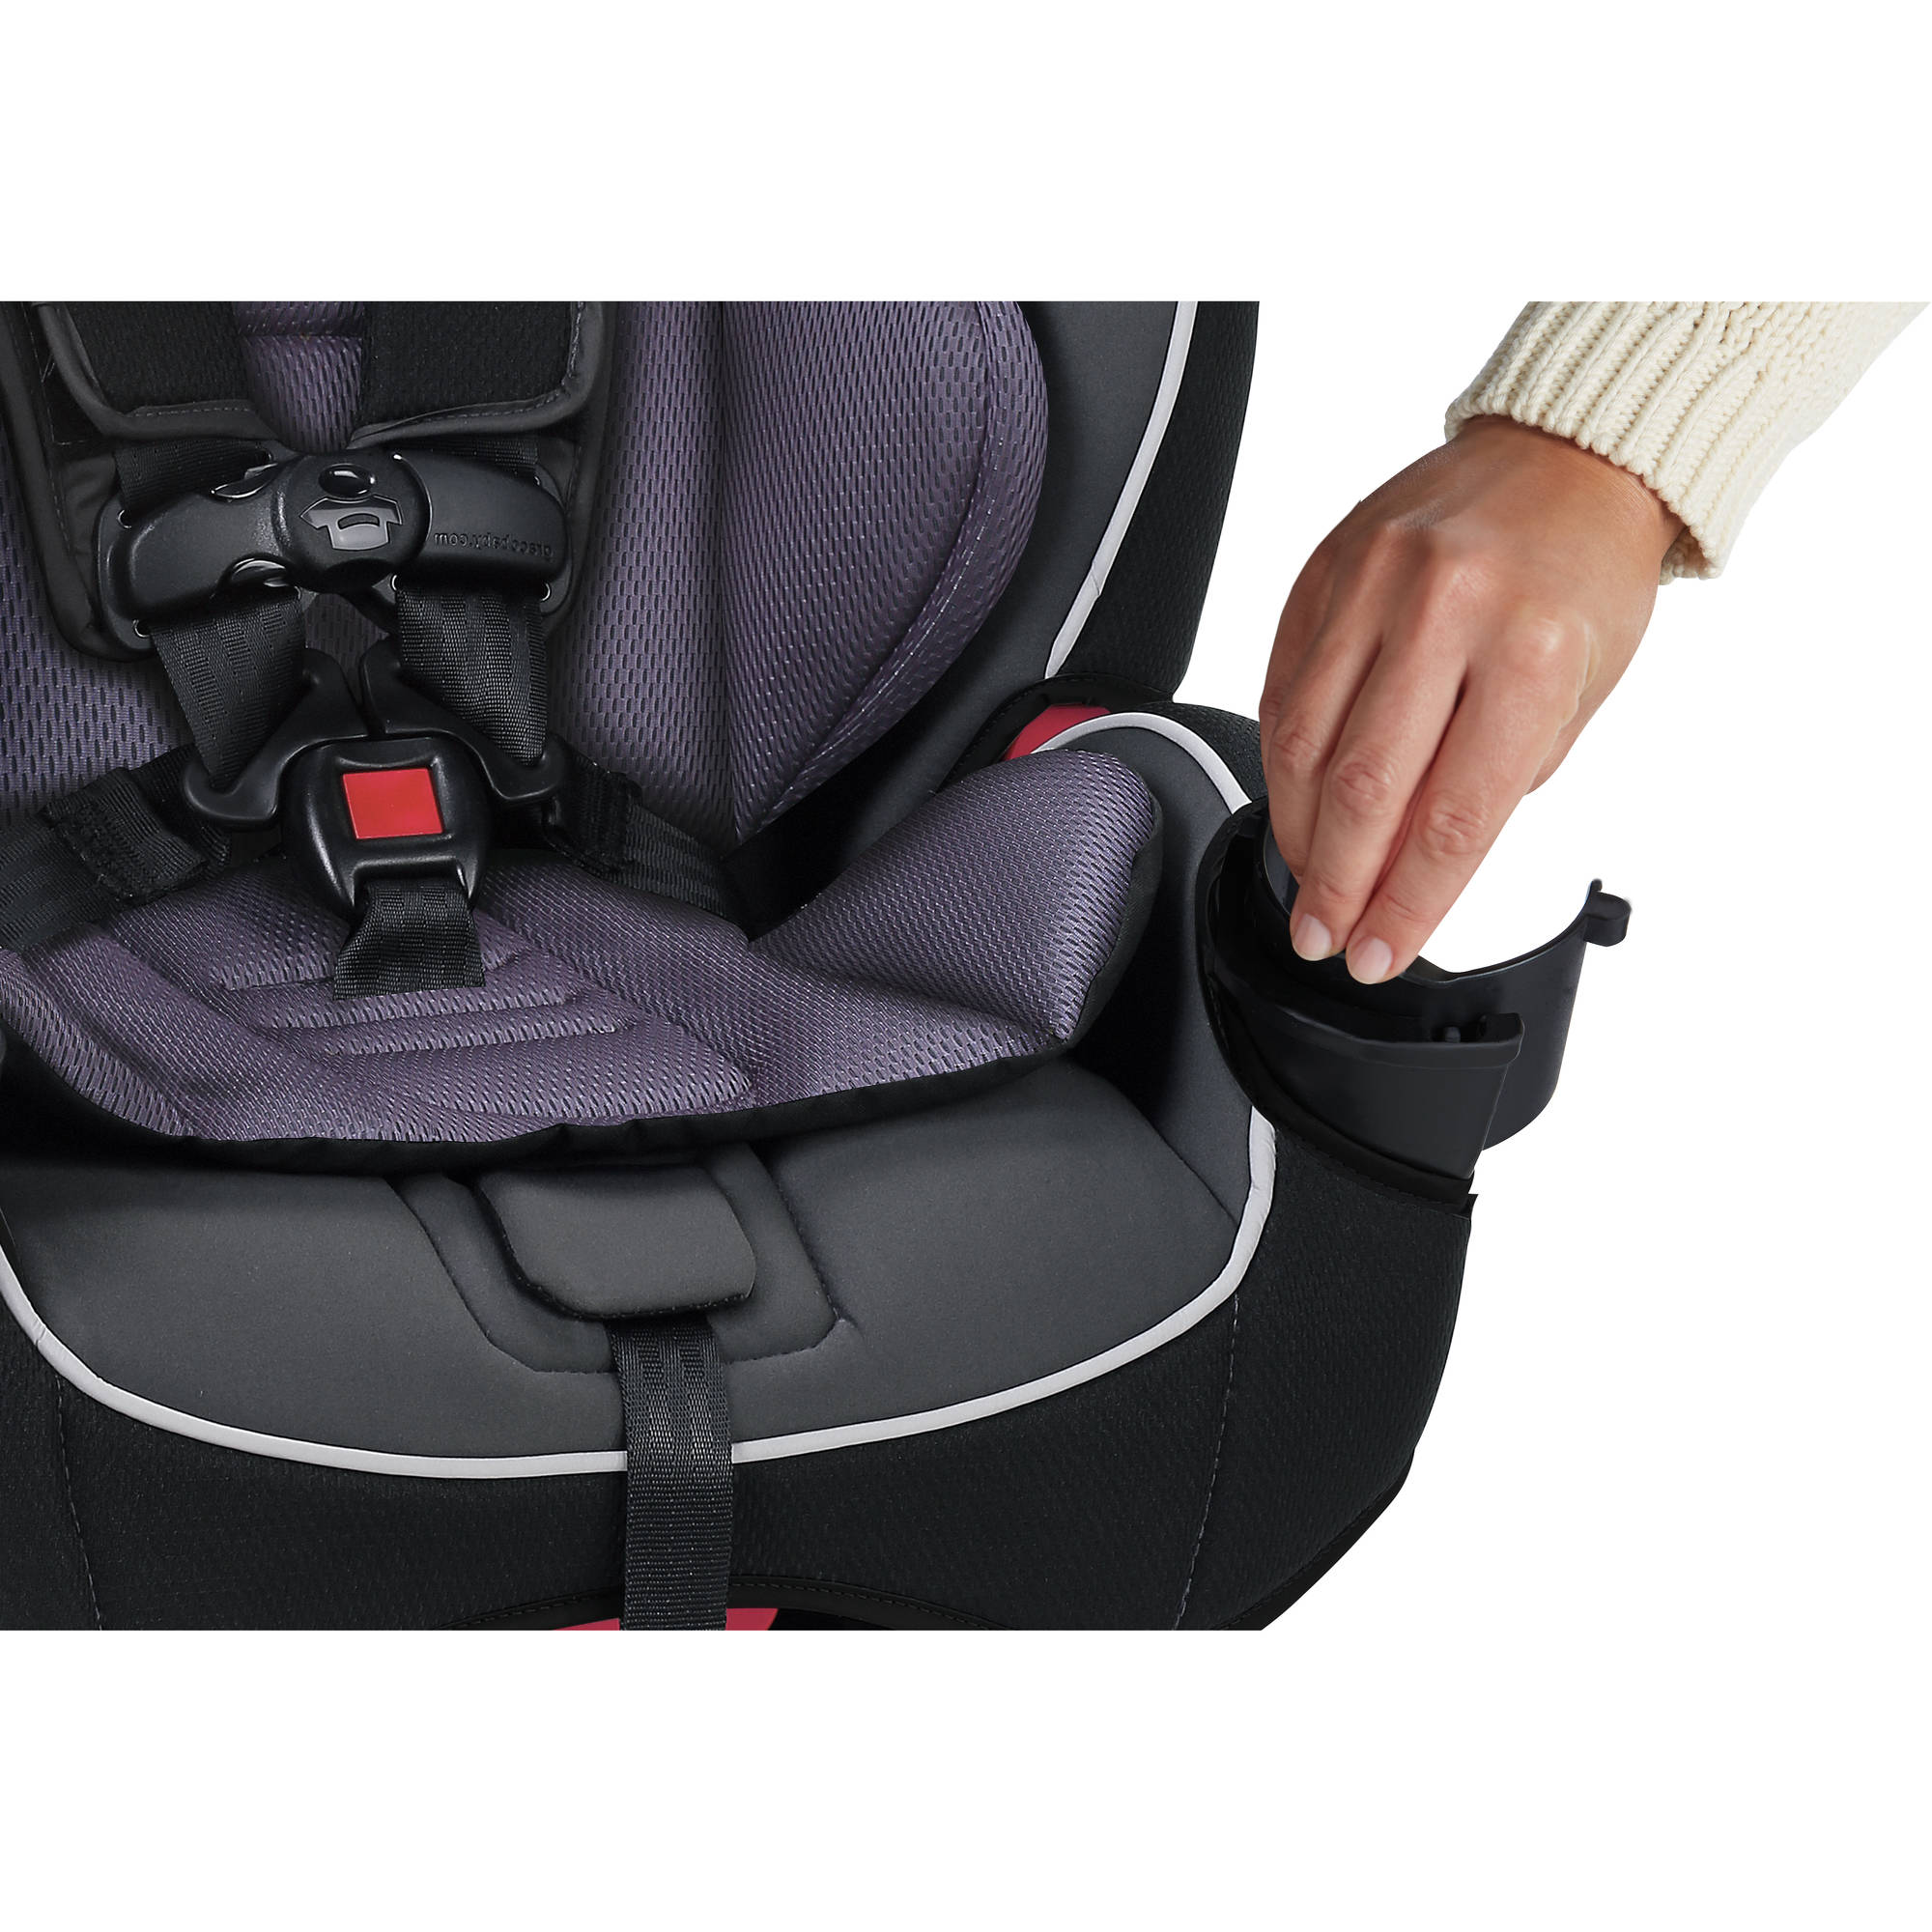 Graco SlimFit All-in-One Convertible Car Seat, Anabele Purple - image 4 of 13